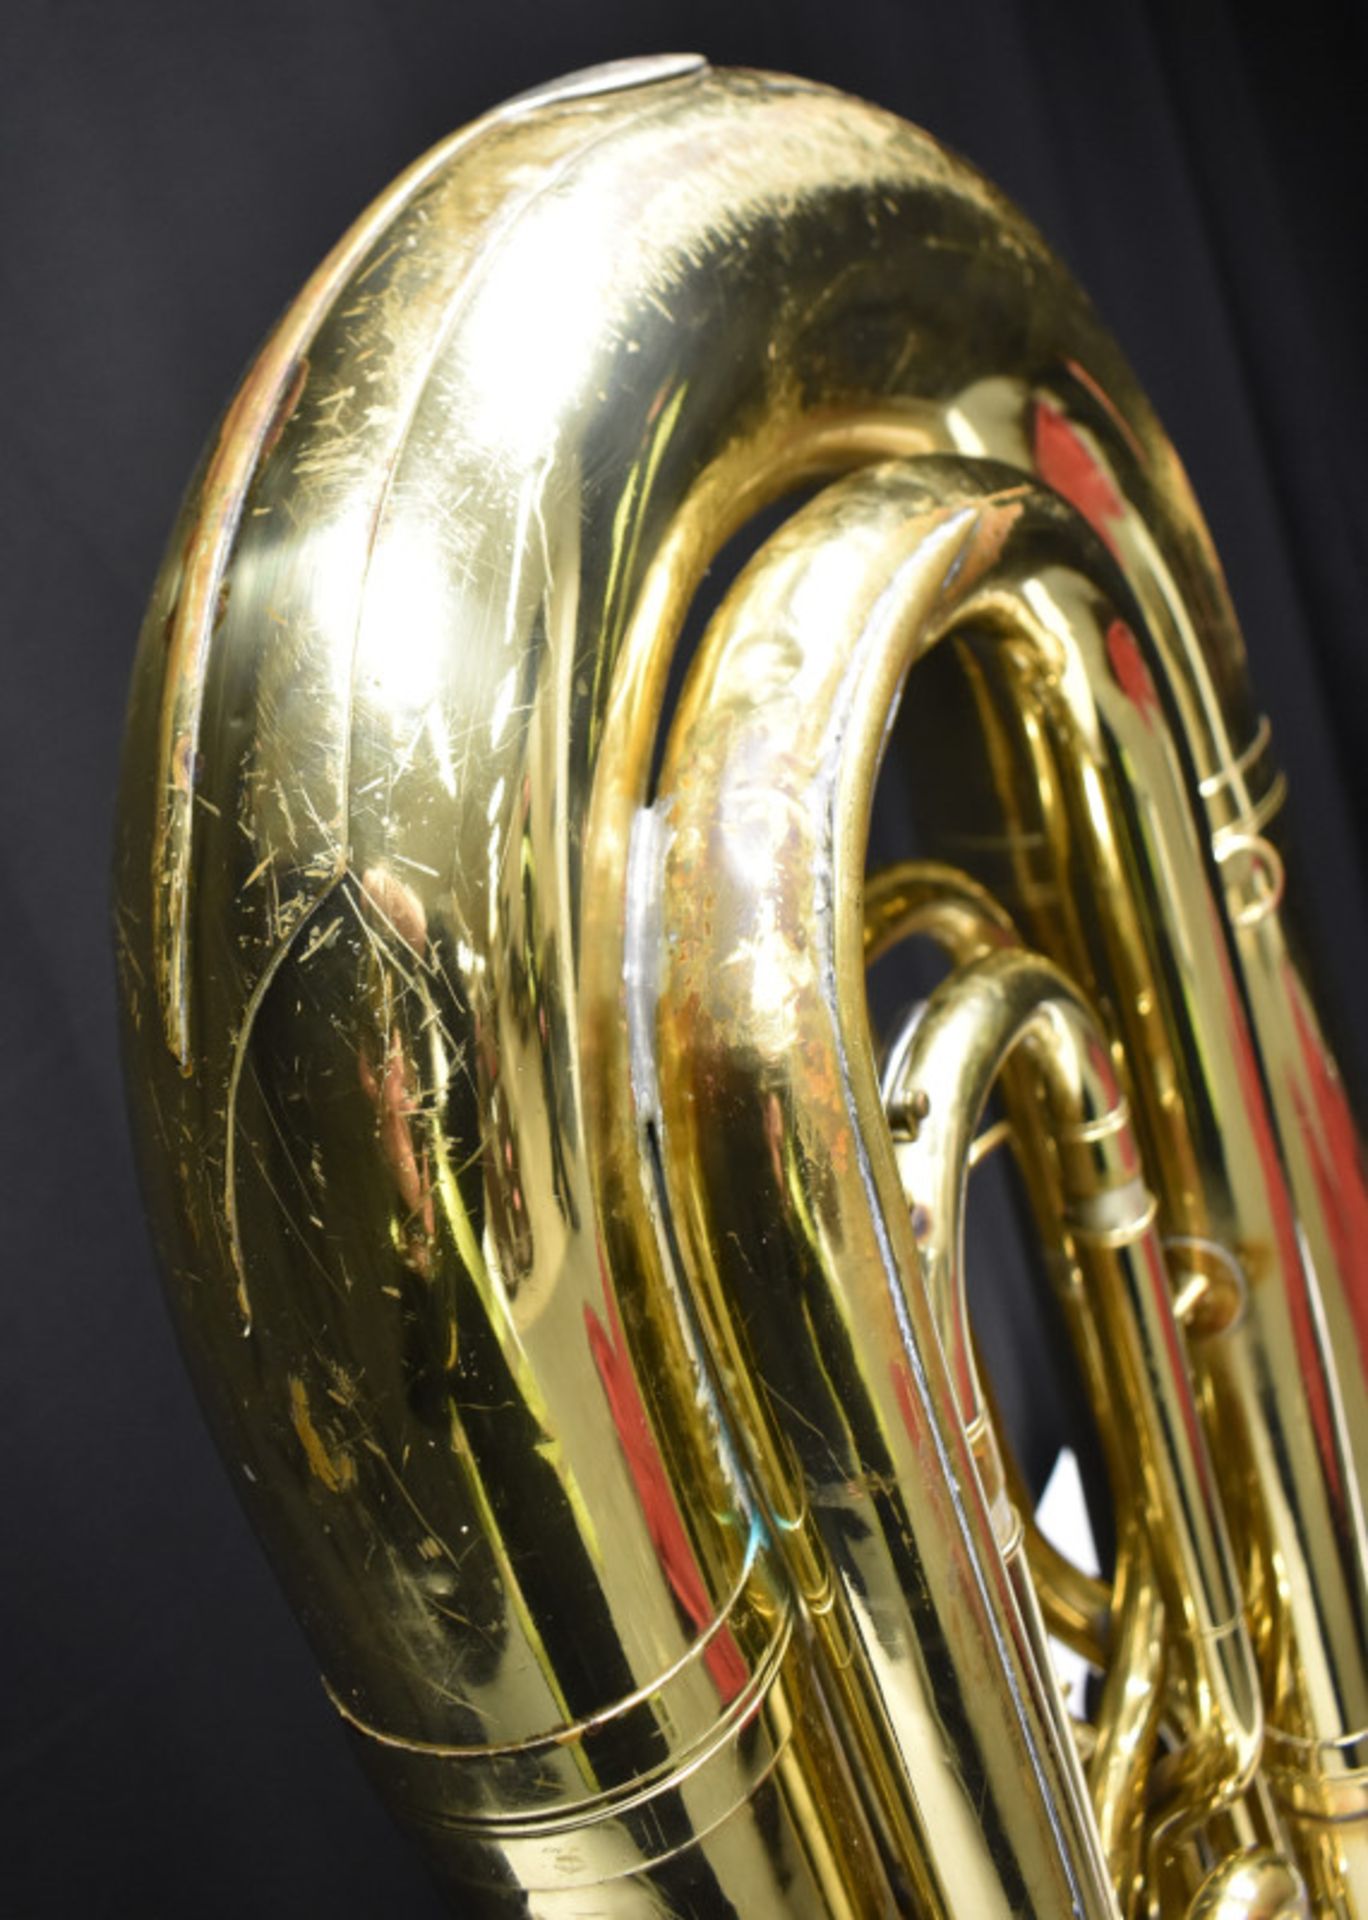 Besson Sovereign BE994 Tuba in Besson Case (case damaged no wheels) - Serial No. 883092 - - Image 13 of 21